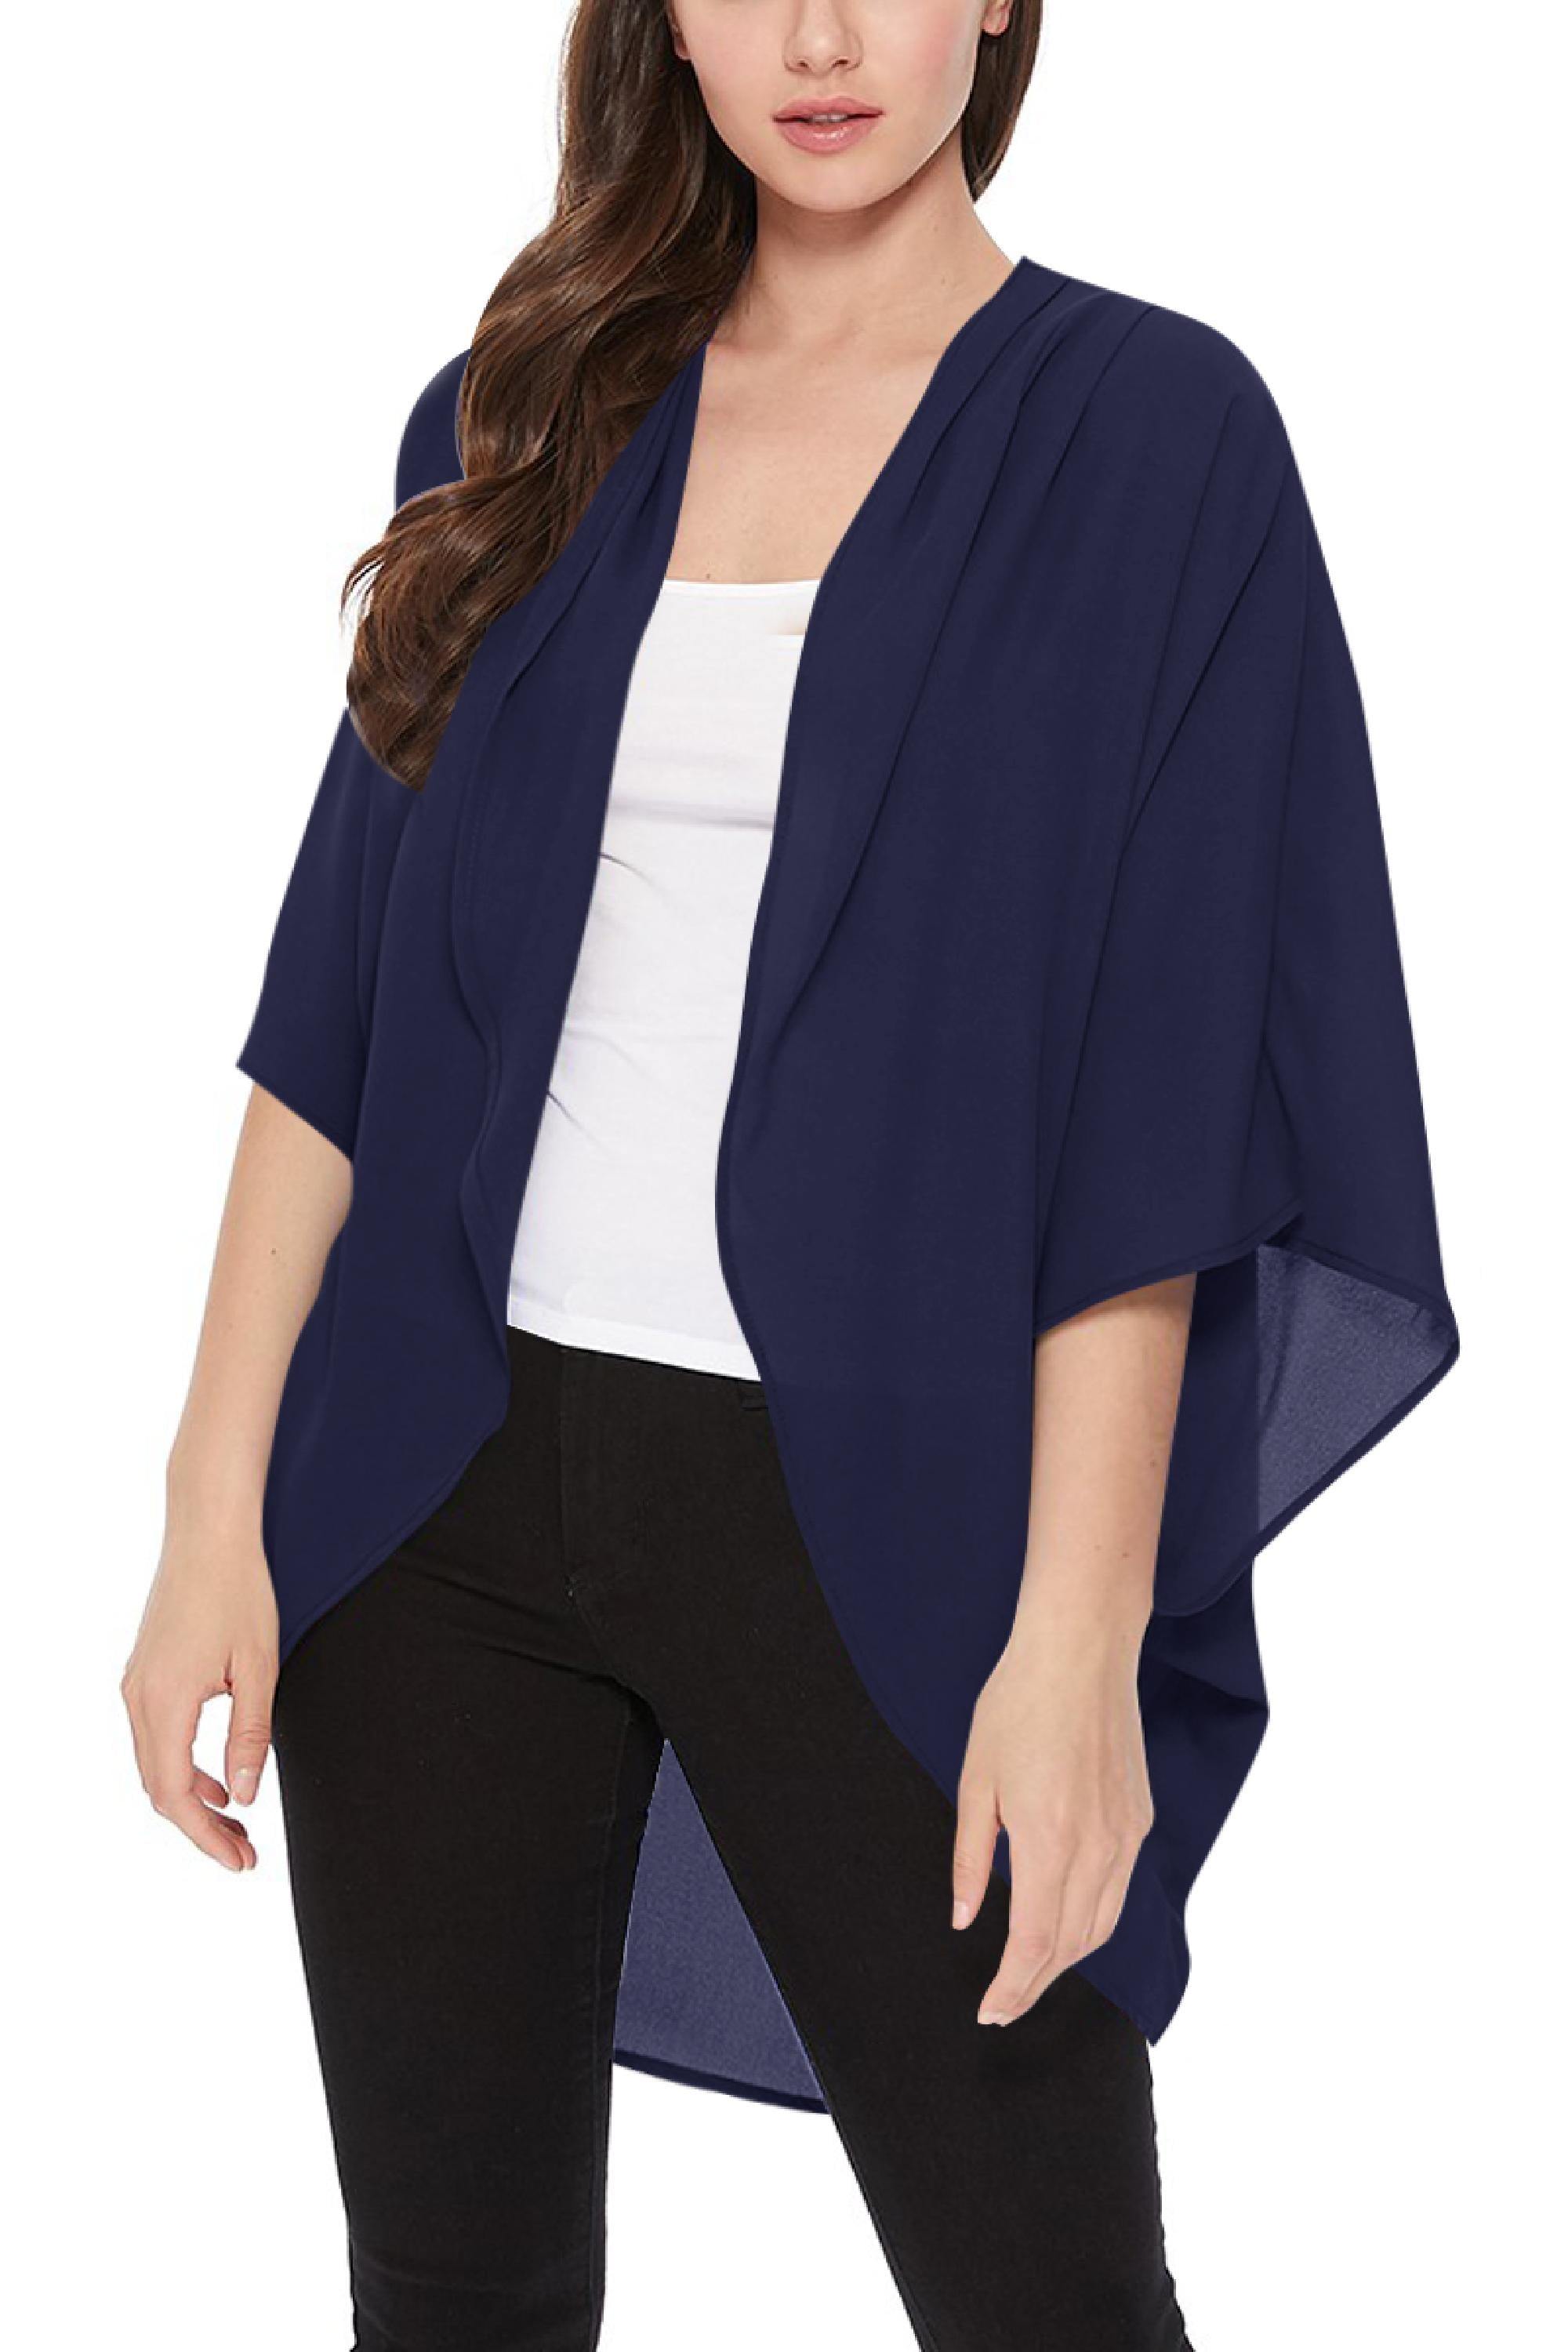 Women's Loose Fit 3/4 Sleeves Kimono Style Cover Up Solid Cardigan S-3XL